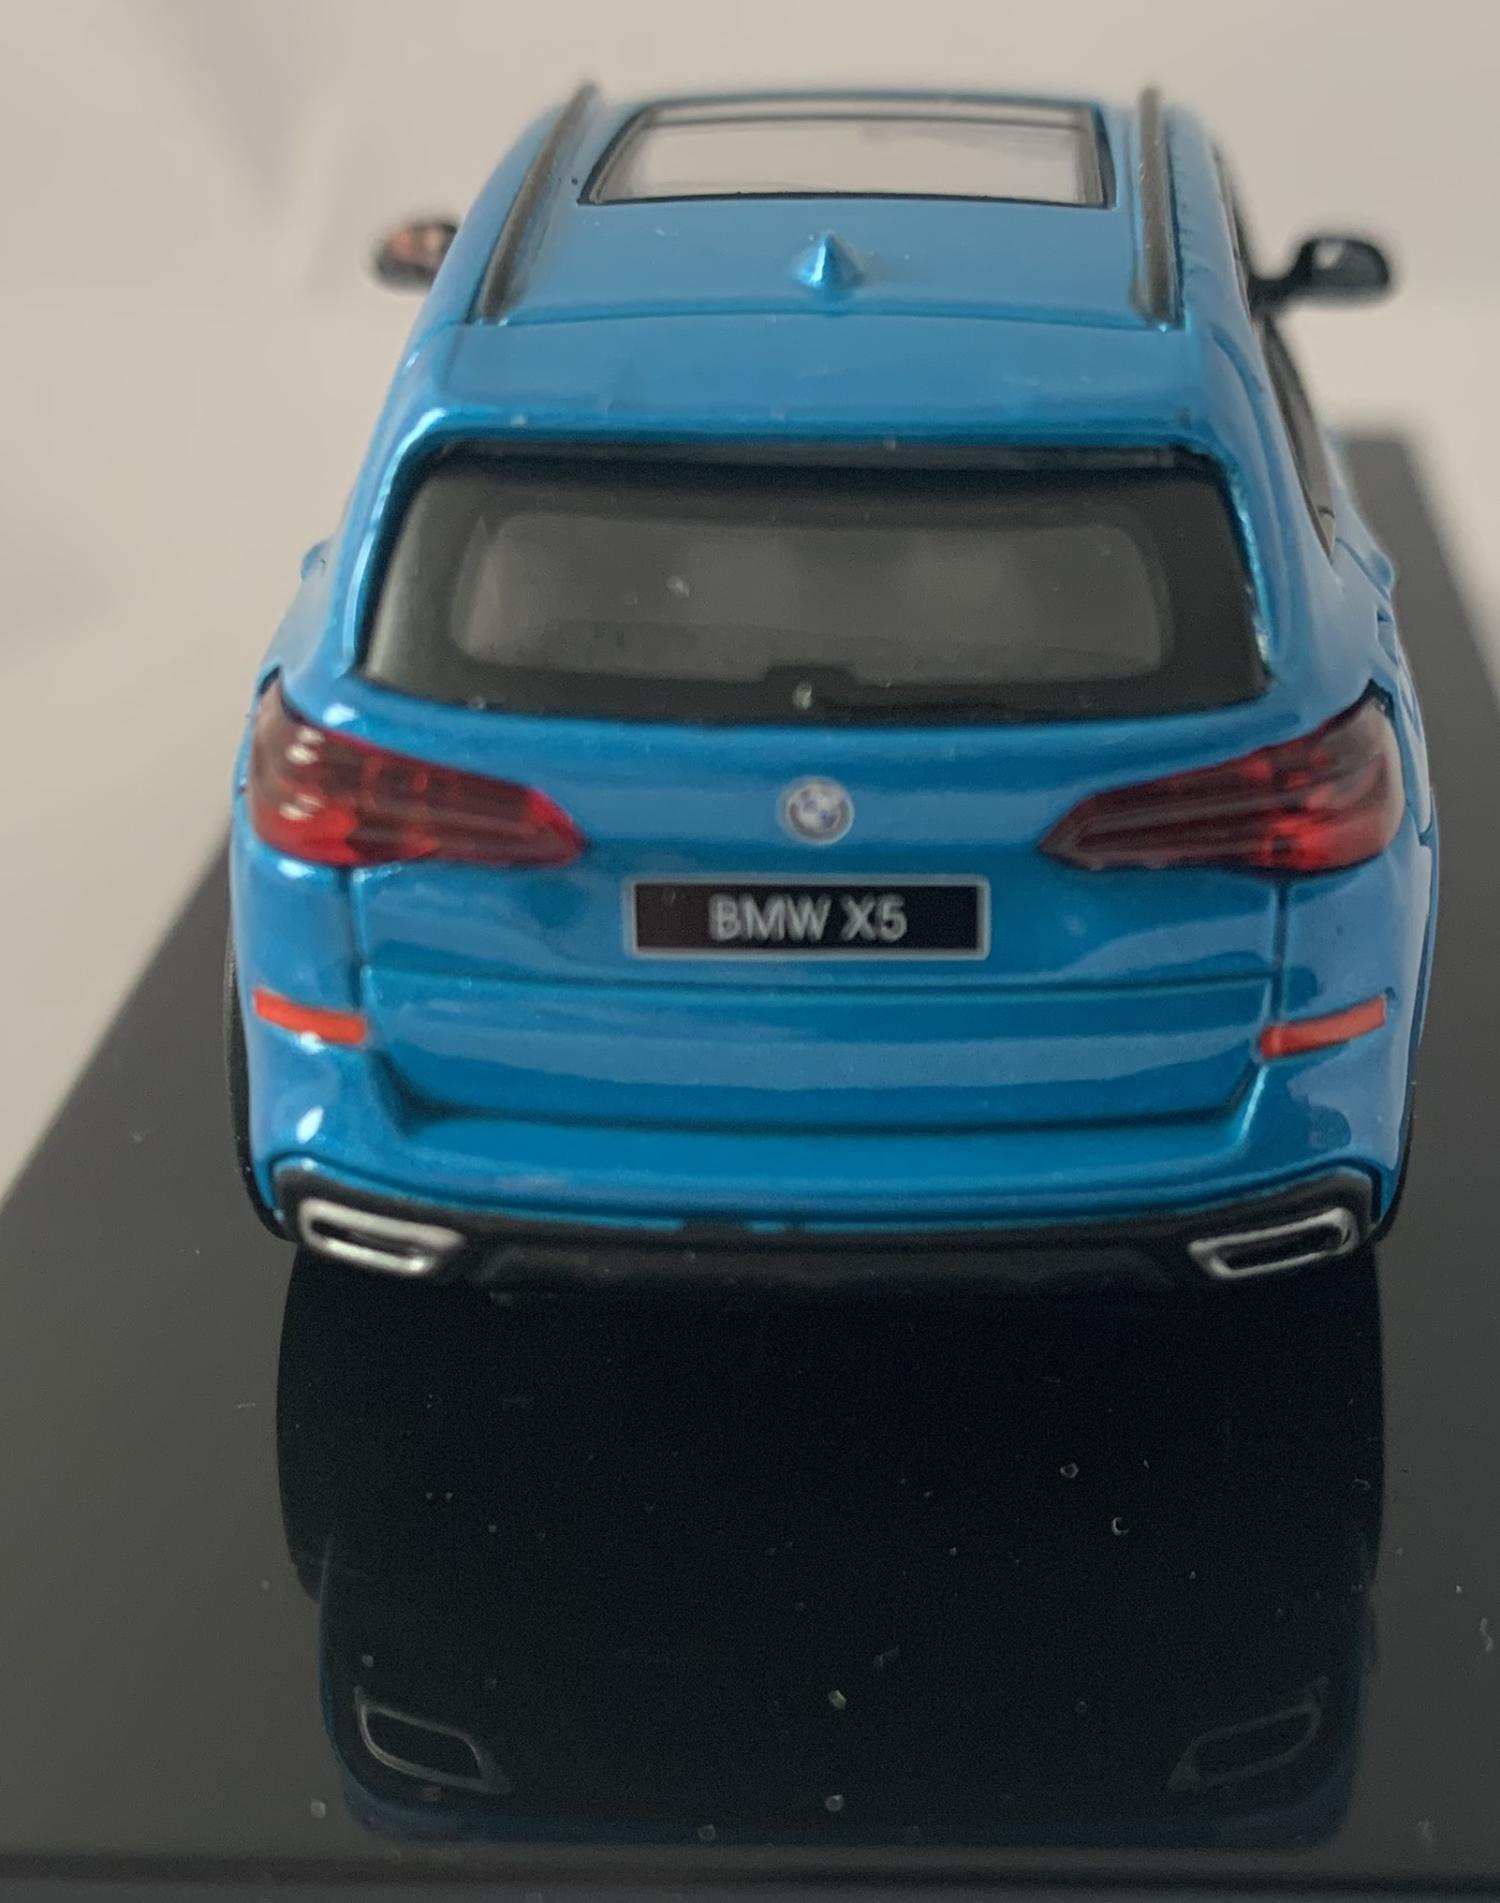 n excellent scale model of a BMW X5 decorated in atlantis with panoramic roof, roof rails and silver wheels.